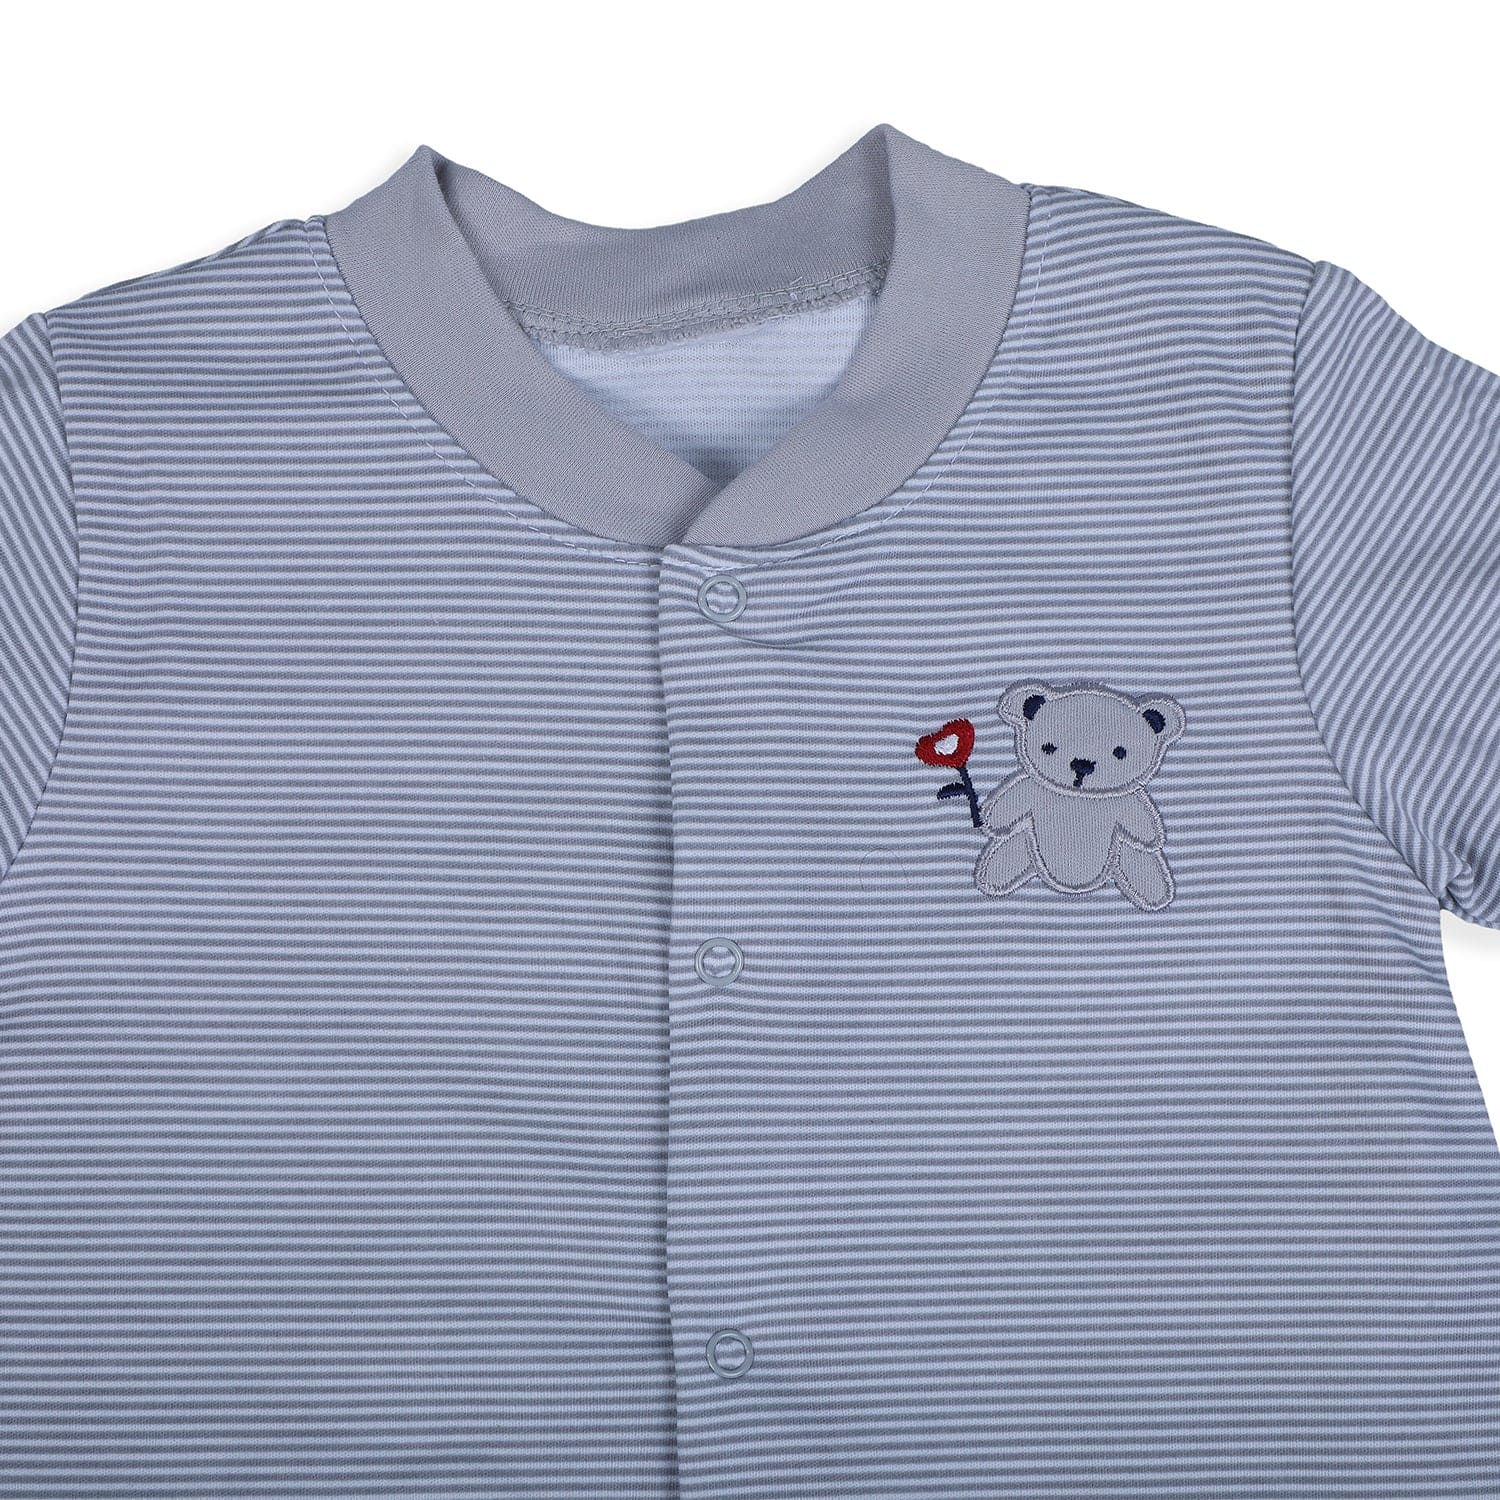 Baby Moo Happy Teddy Embroidered Soft Cotton Short Romper - Grey - Baby Moo